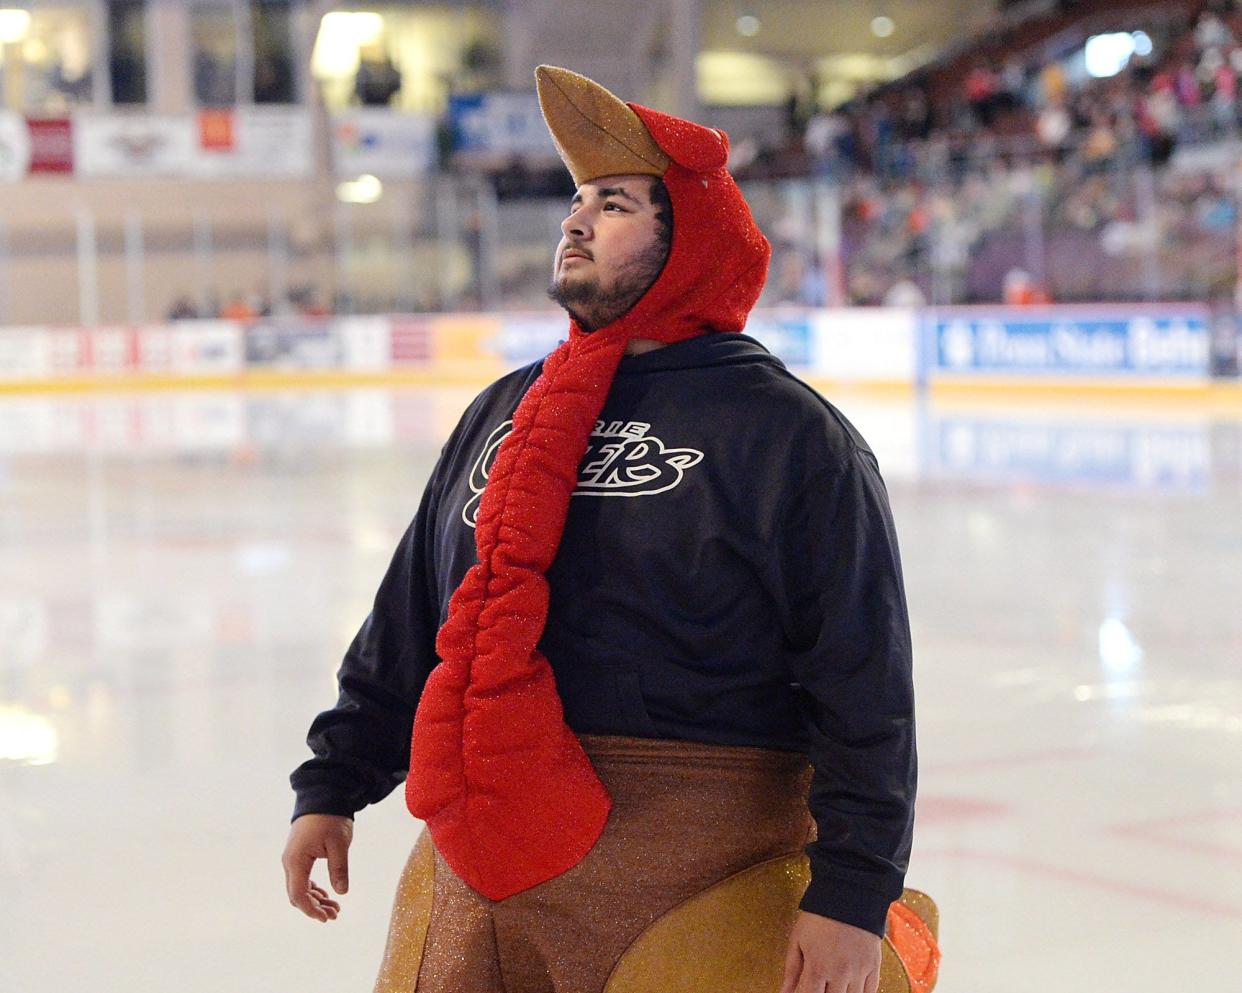 In this 2015 file photo, Miene Al-Shamary, 18, involved with Erie Otters game-day operations, looks to the crowd after tossing t-shirts into the crowd between periods against the Kitchener Rangers at Erie Insurance Arena in Erie on Nov. 26. The Otters beat the Rangers 3-2 on Thanksgiving night.